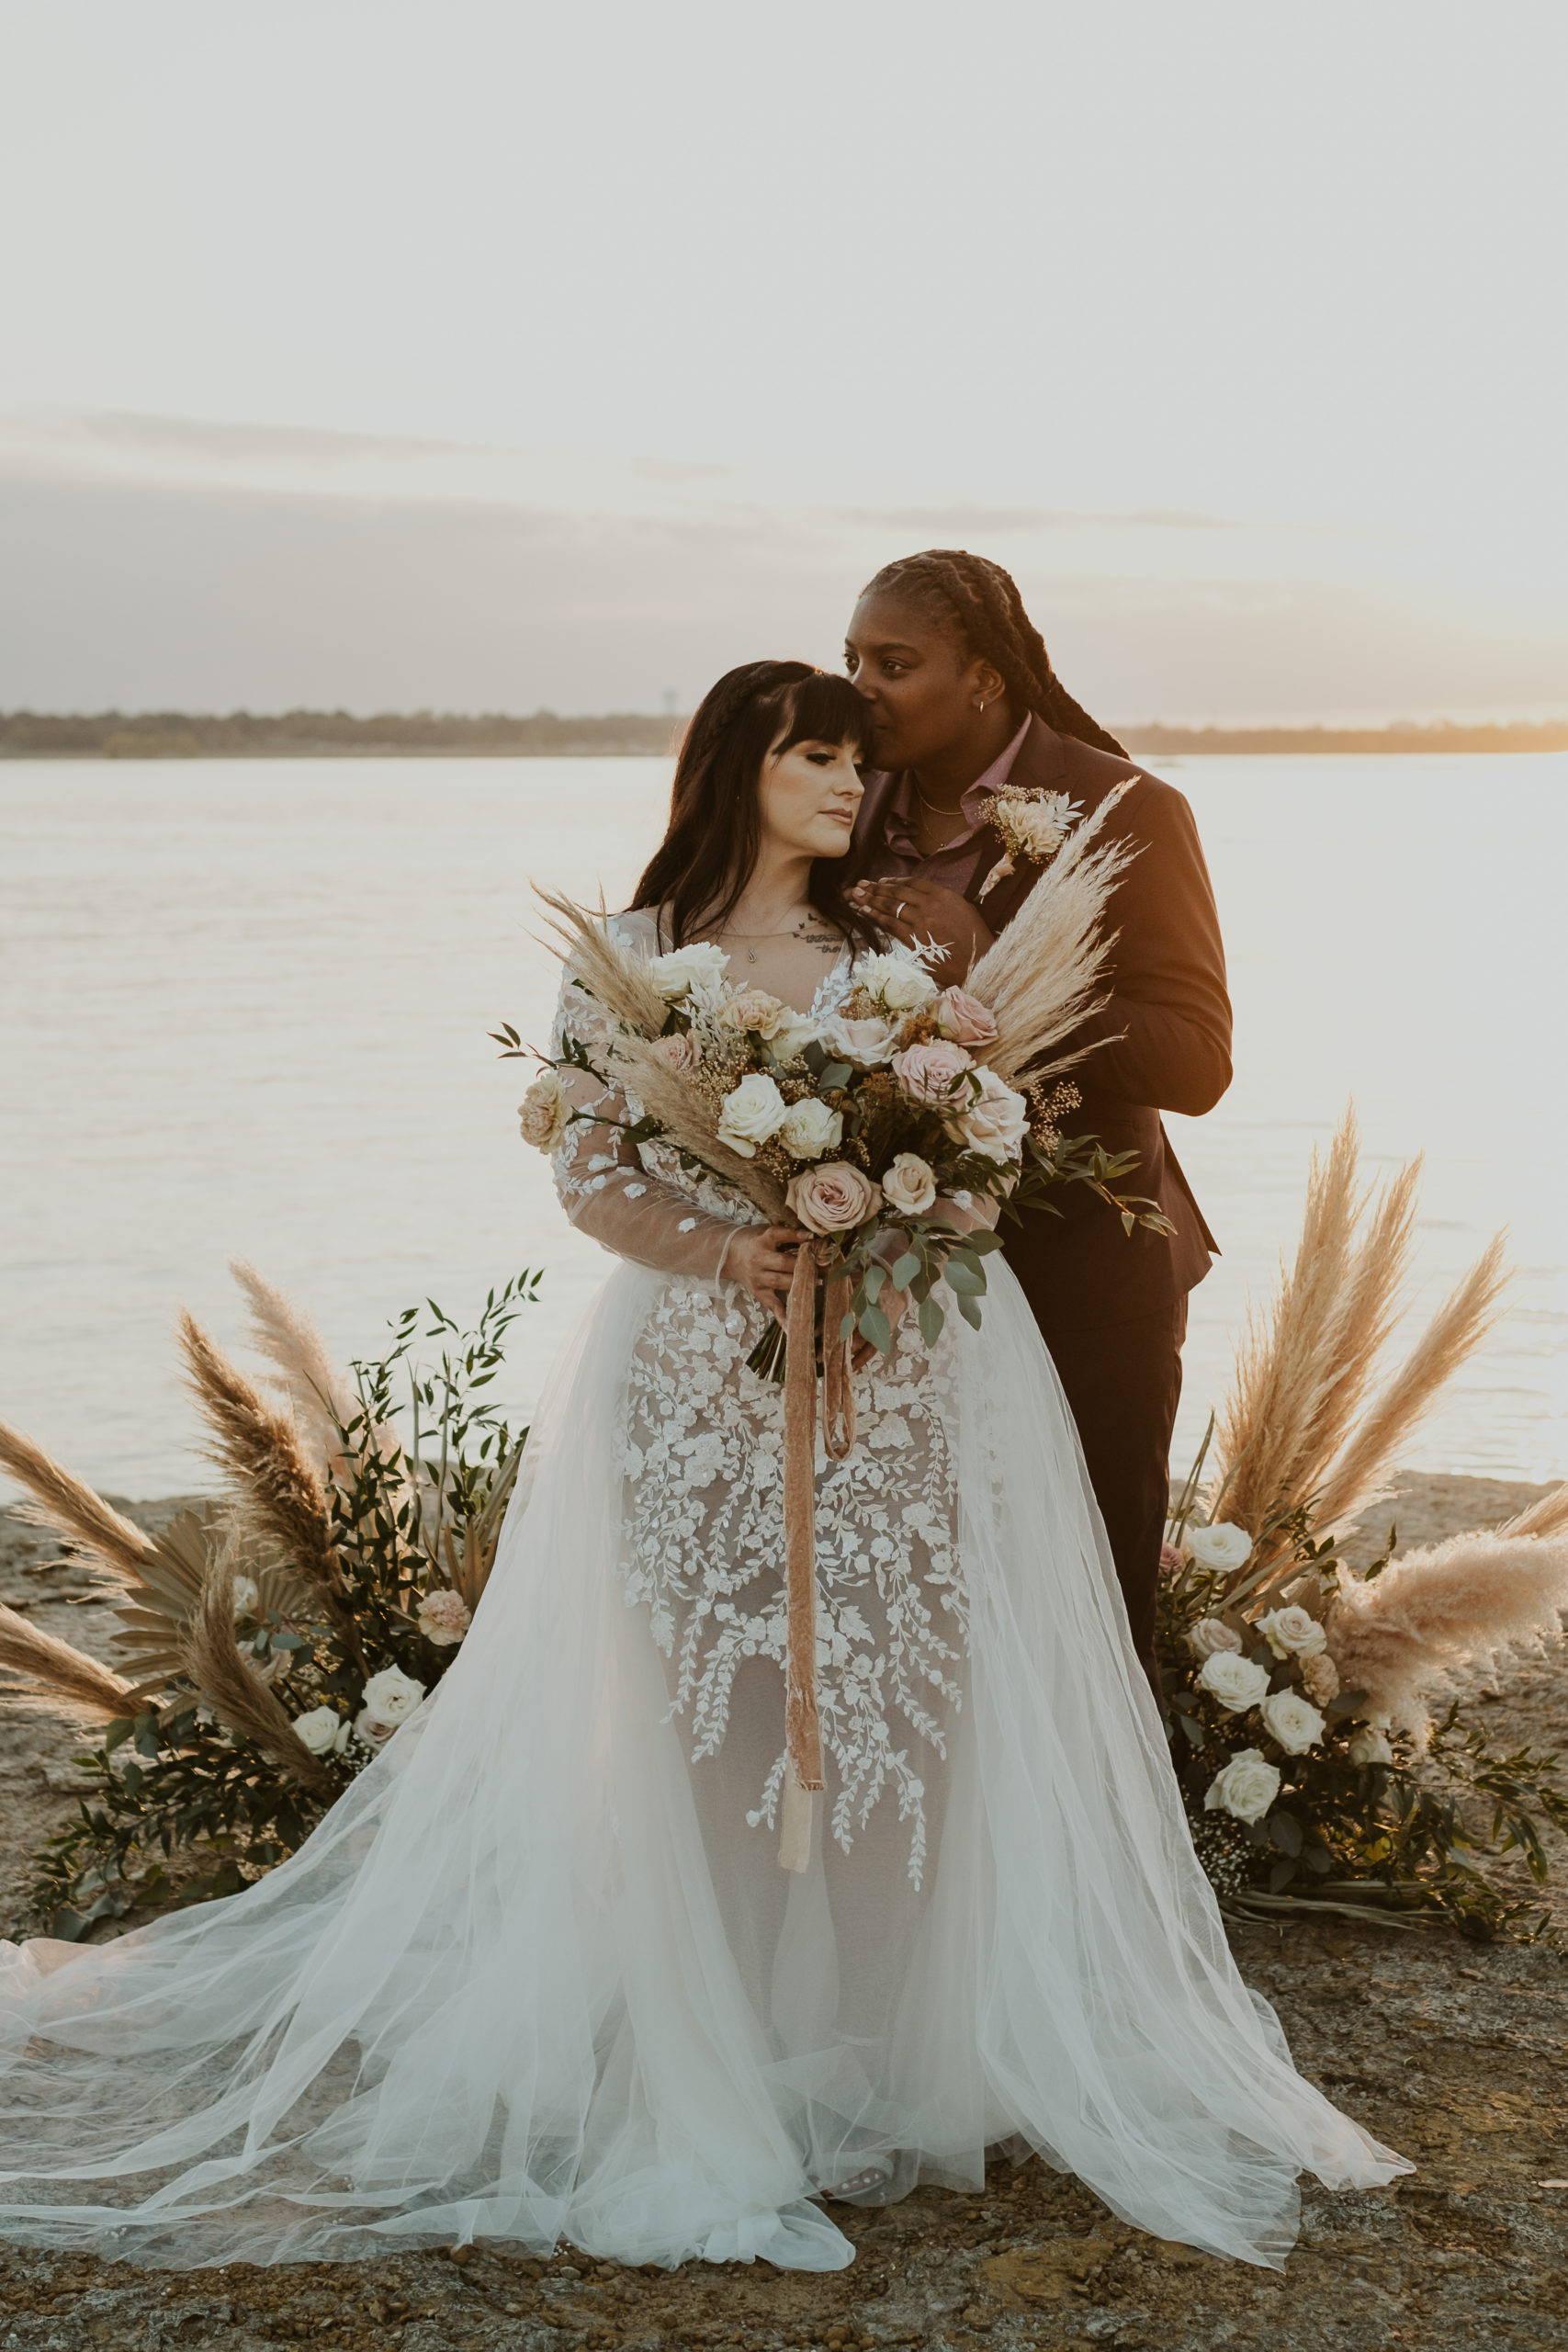 Intimate Elopement at Rockledge Park in Grapevine, Texas